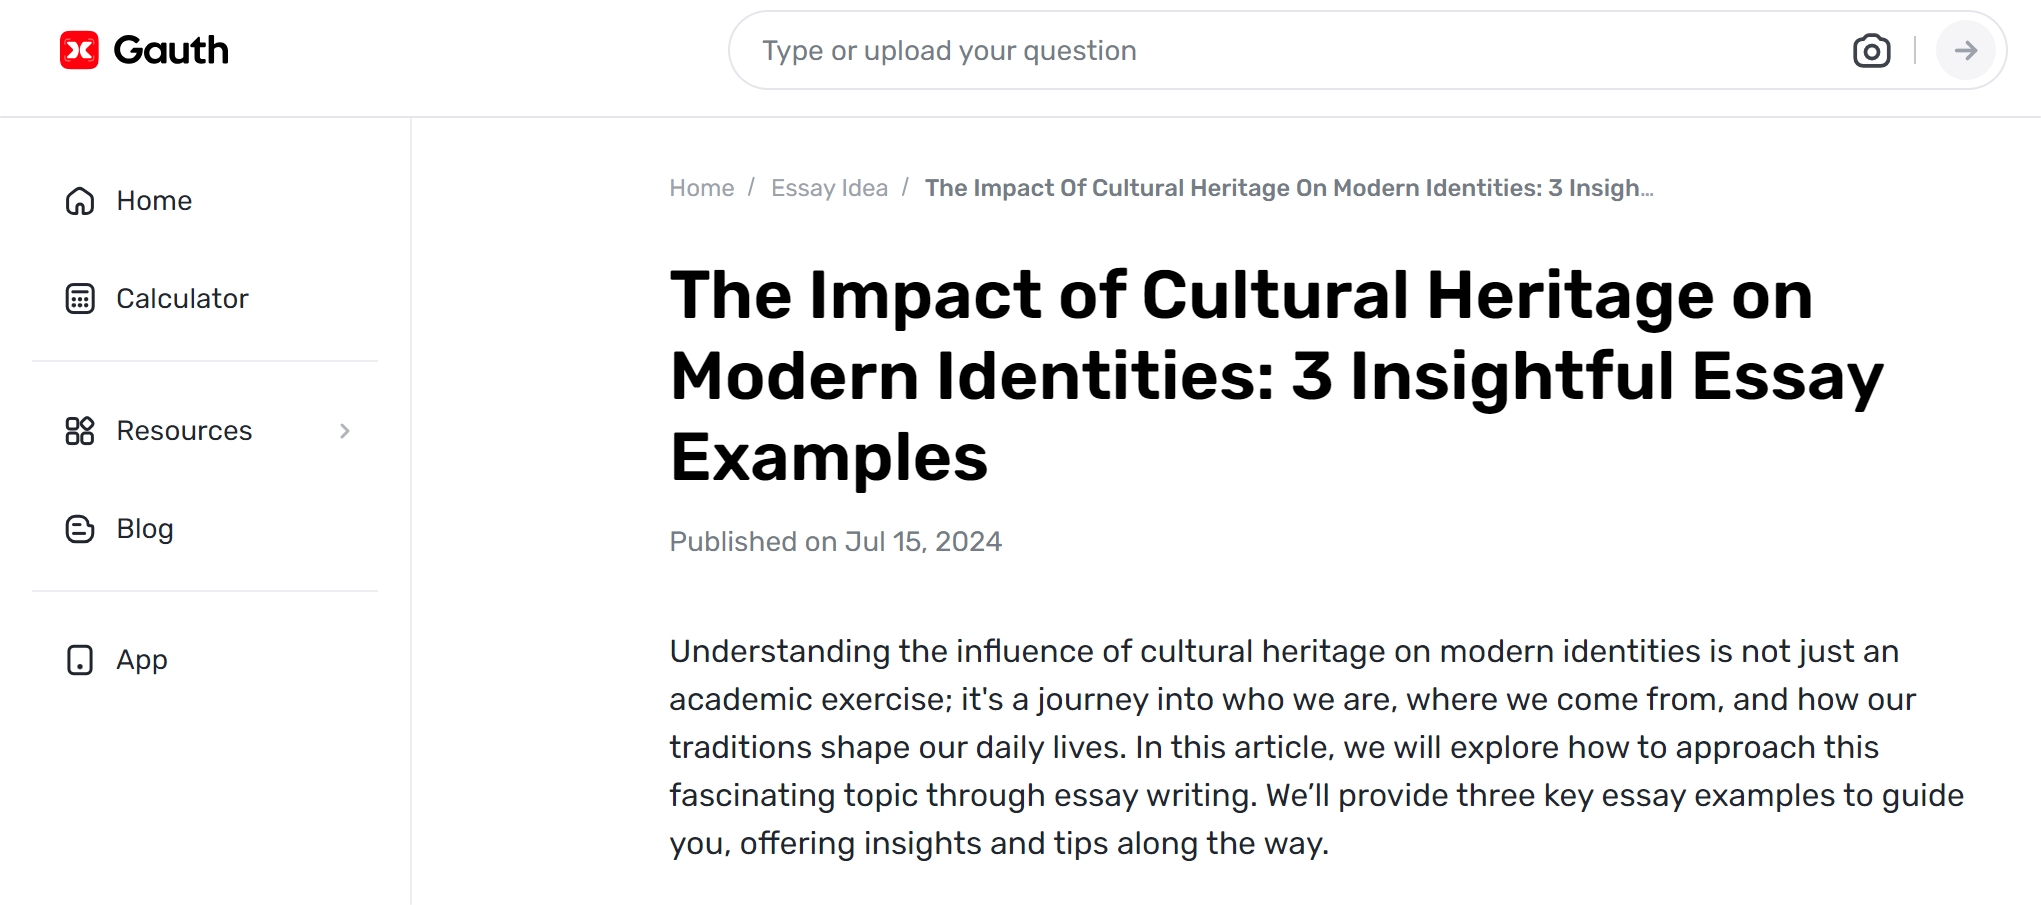 How Noteworthy is the Effect of Cultural Heritage on Modern Identities?